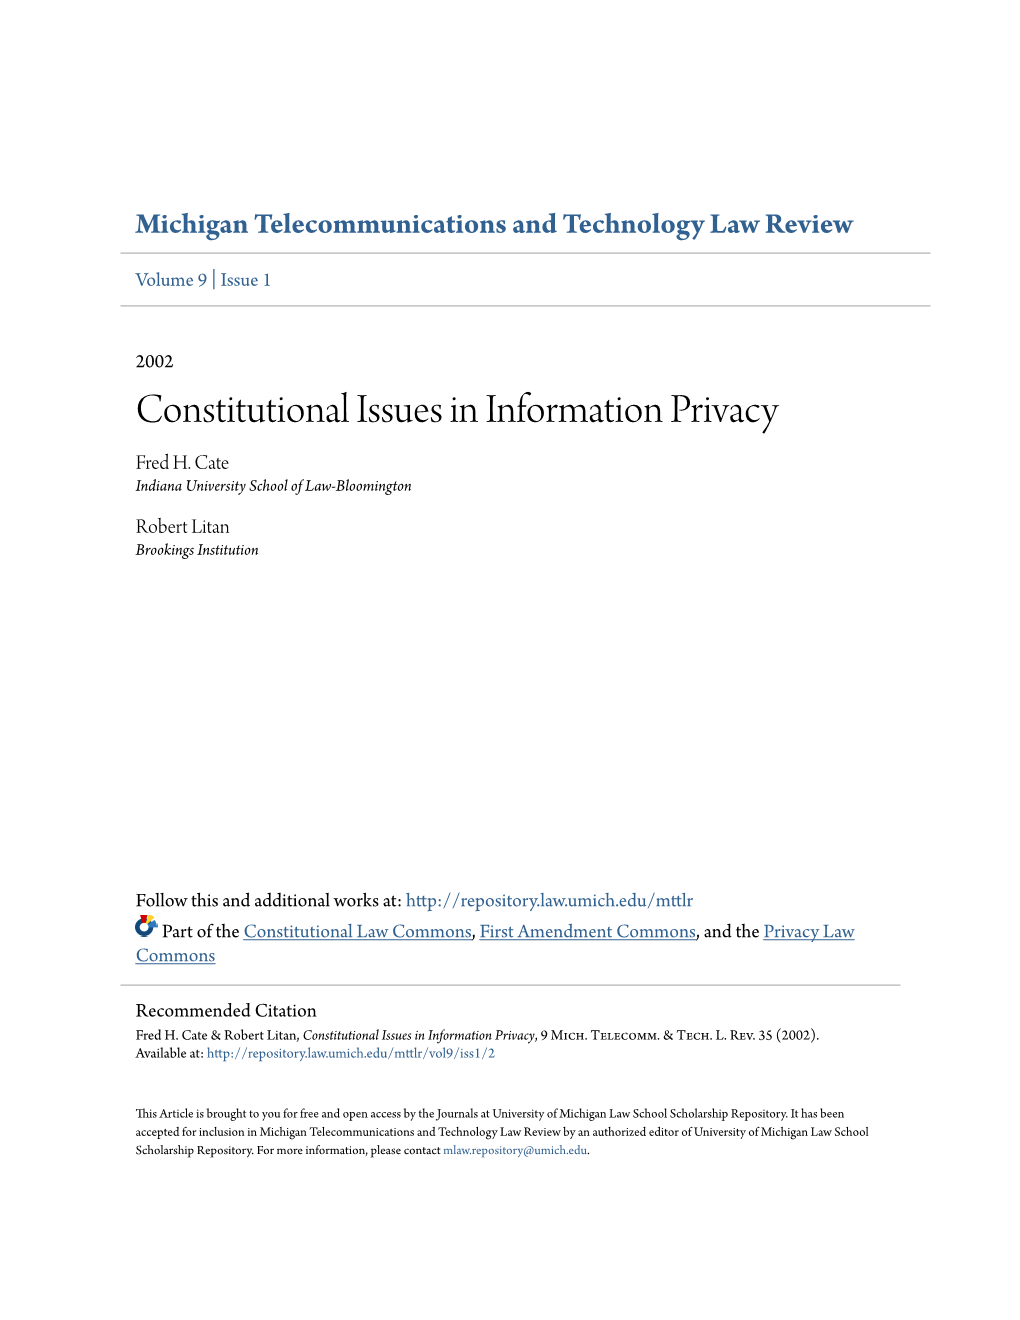 Constitutional Issues in Information Privacy Fred H